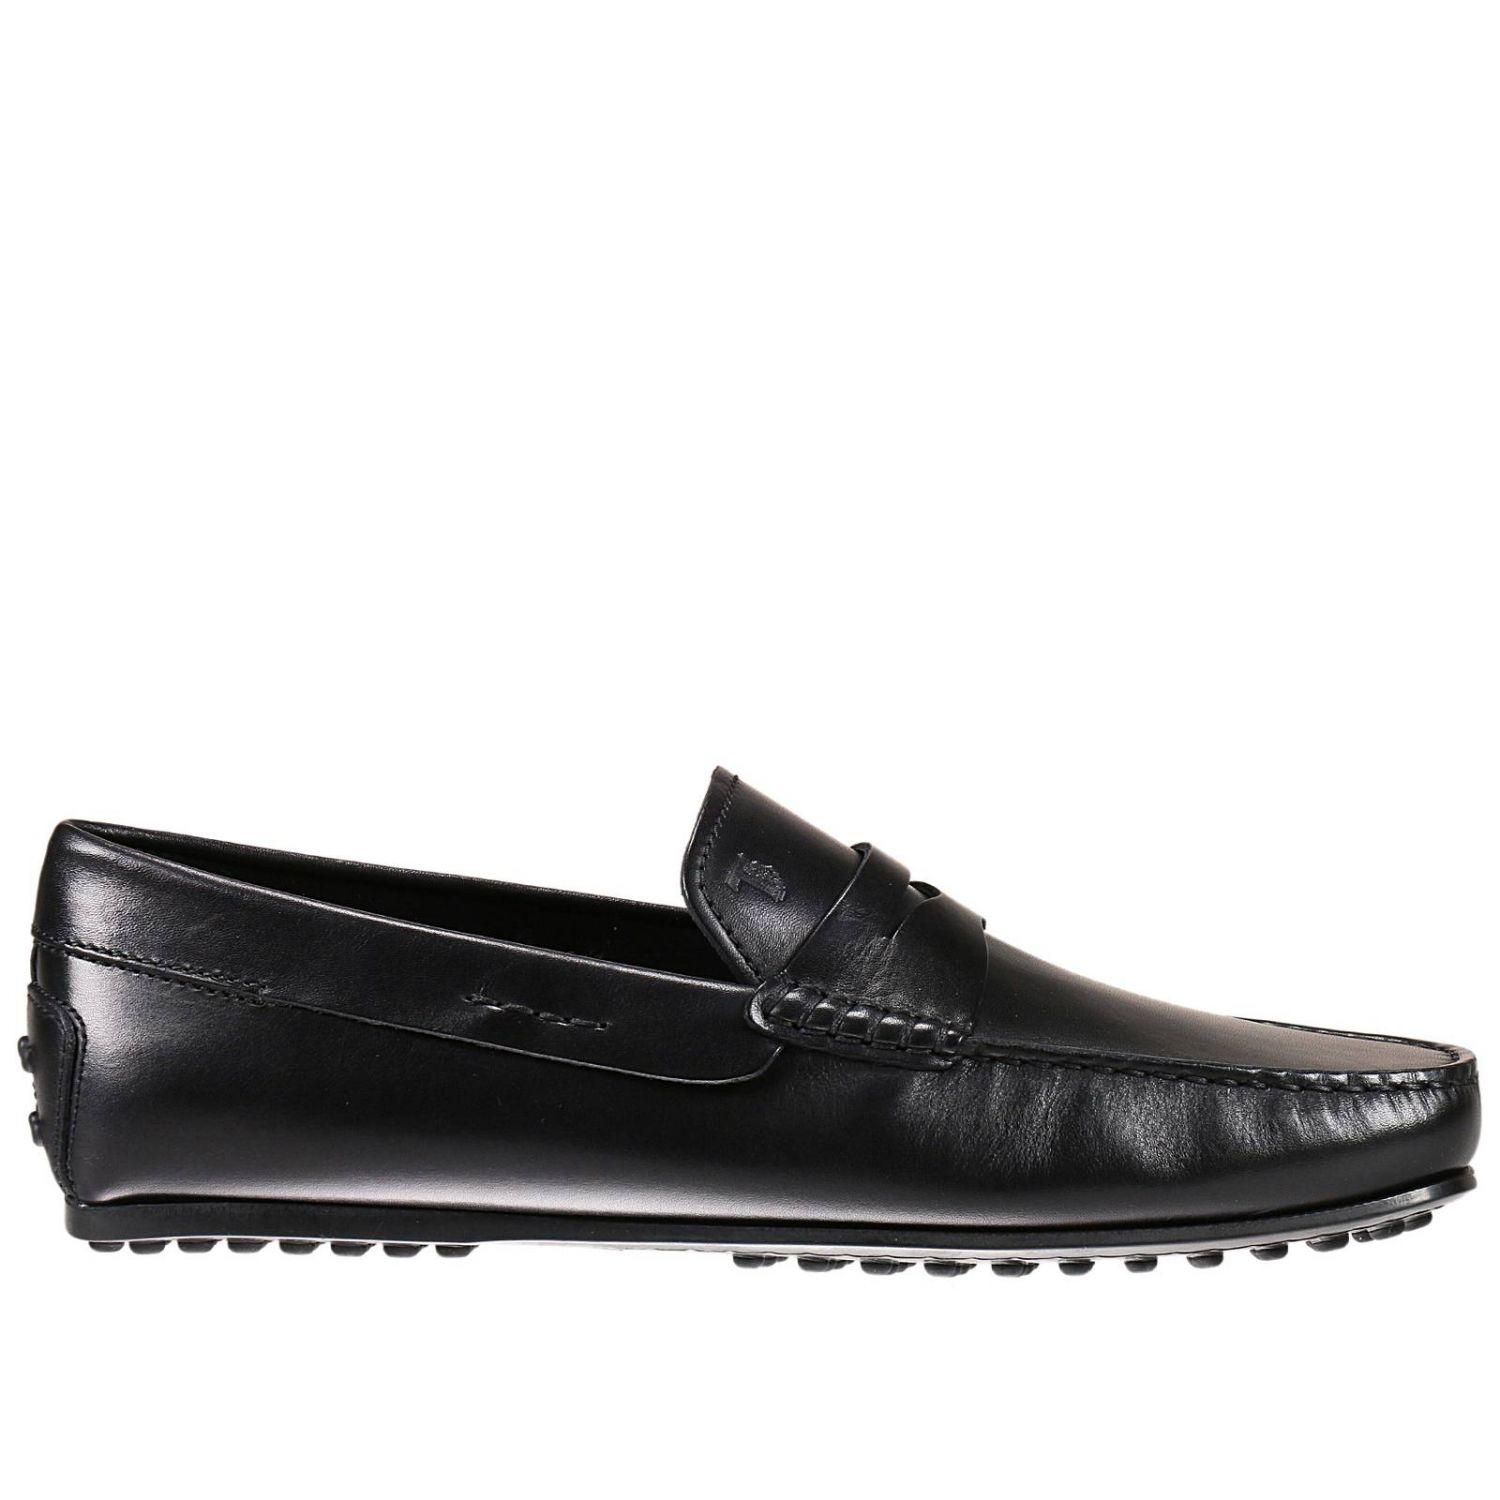 Lyst - Tod'S Loafers Shoes Men in Black for Men